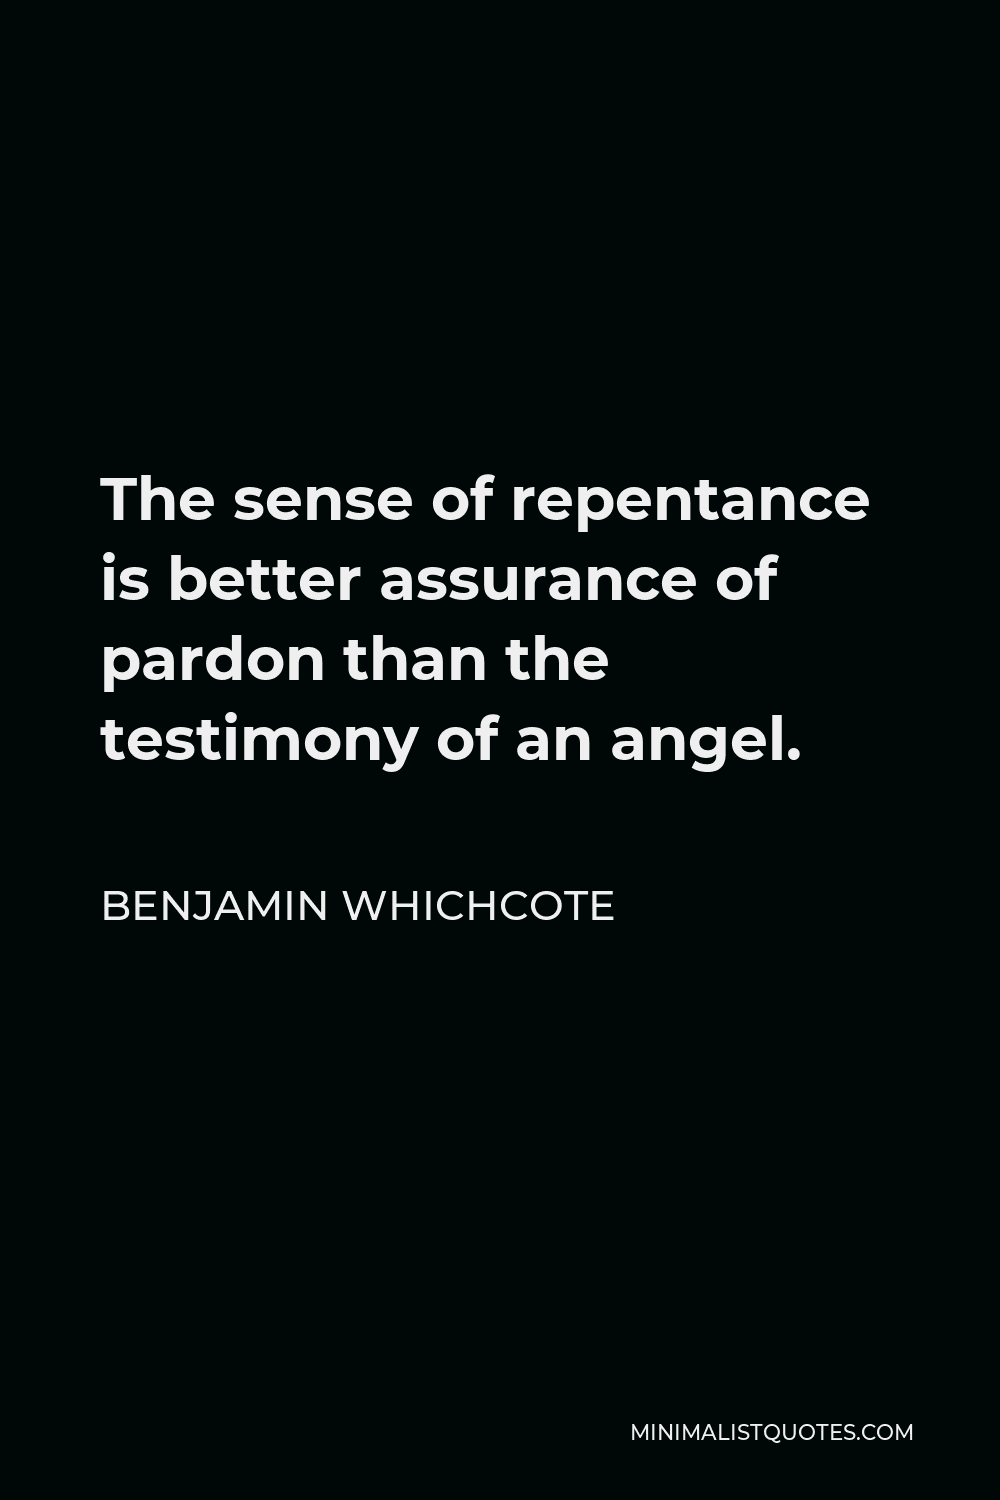 Benjamin Whichcote Quote - The sense of repentance is better assurance of pardon than the testimony of an angel.